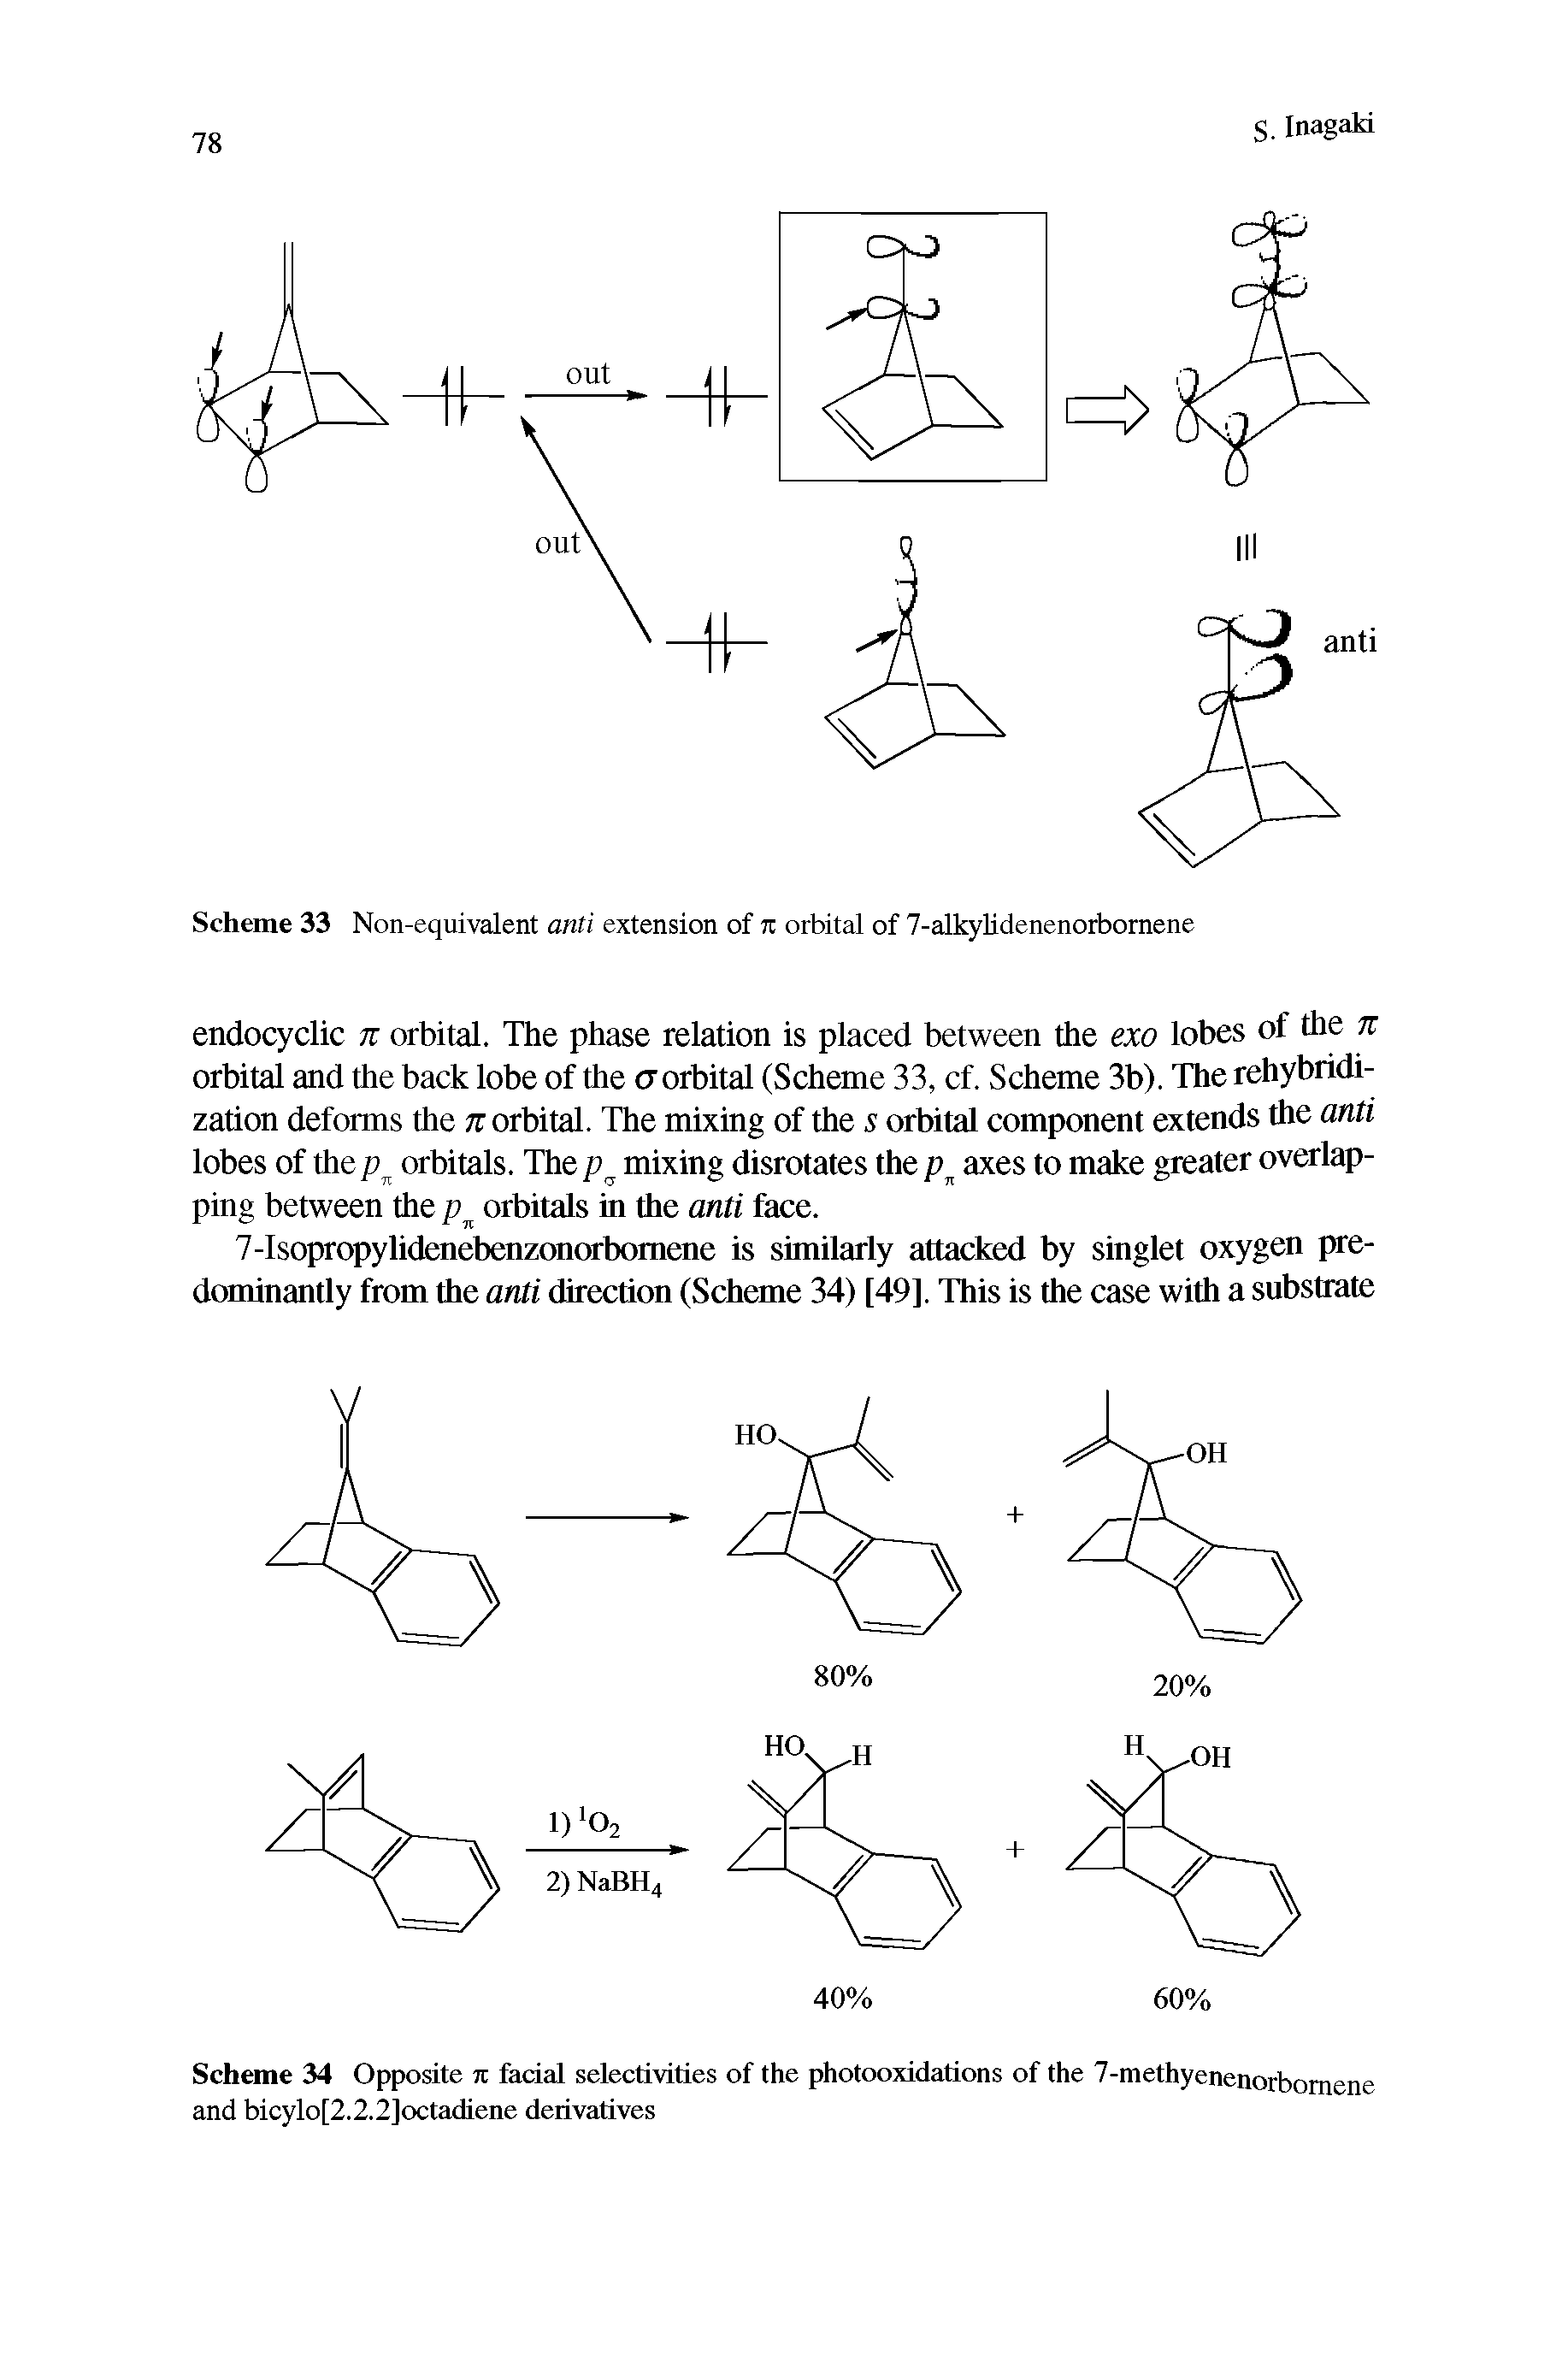 Scheme 34 Opposite n facial selectivities of the photooxidations of the 7-methyenenorbomene and bicylo[2.2.2]octadiene derivatives...